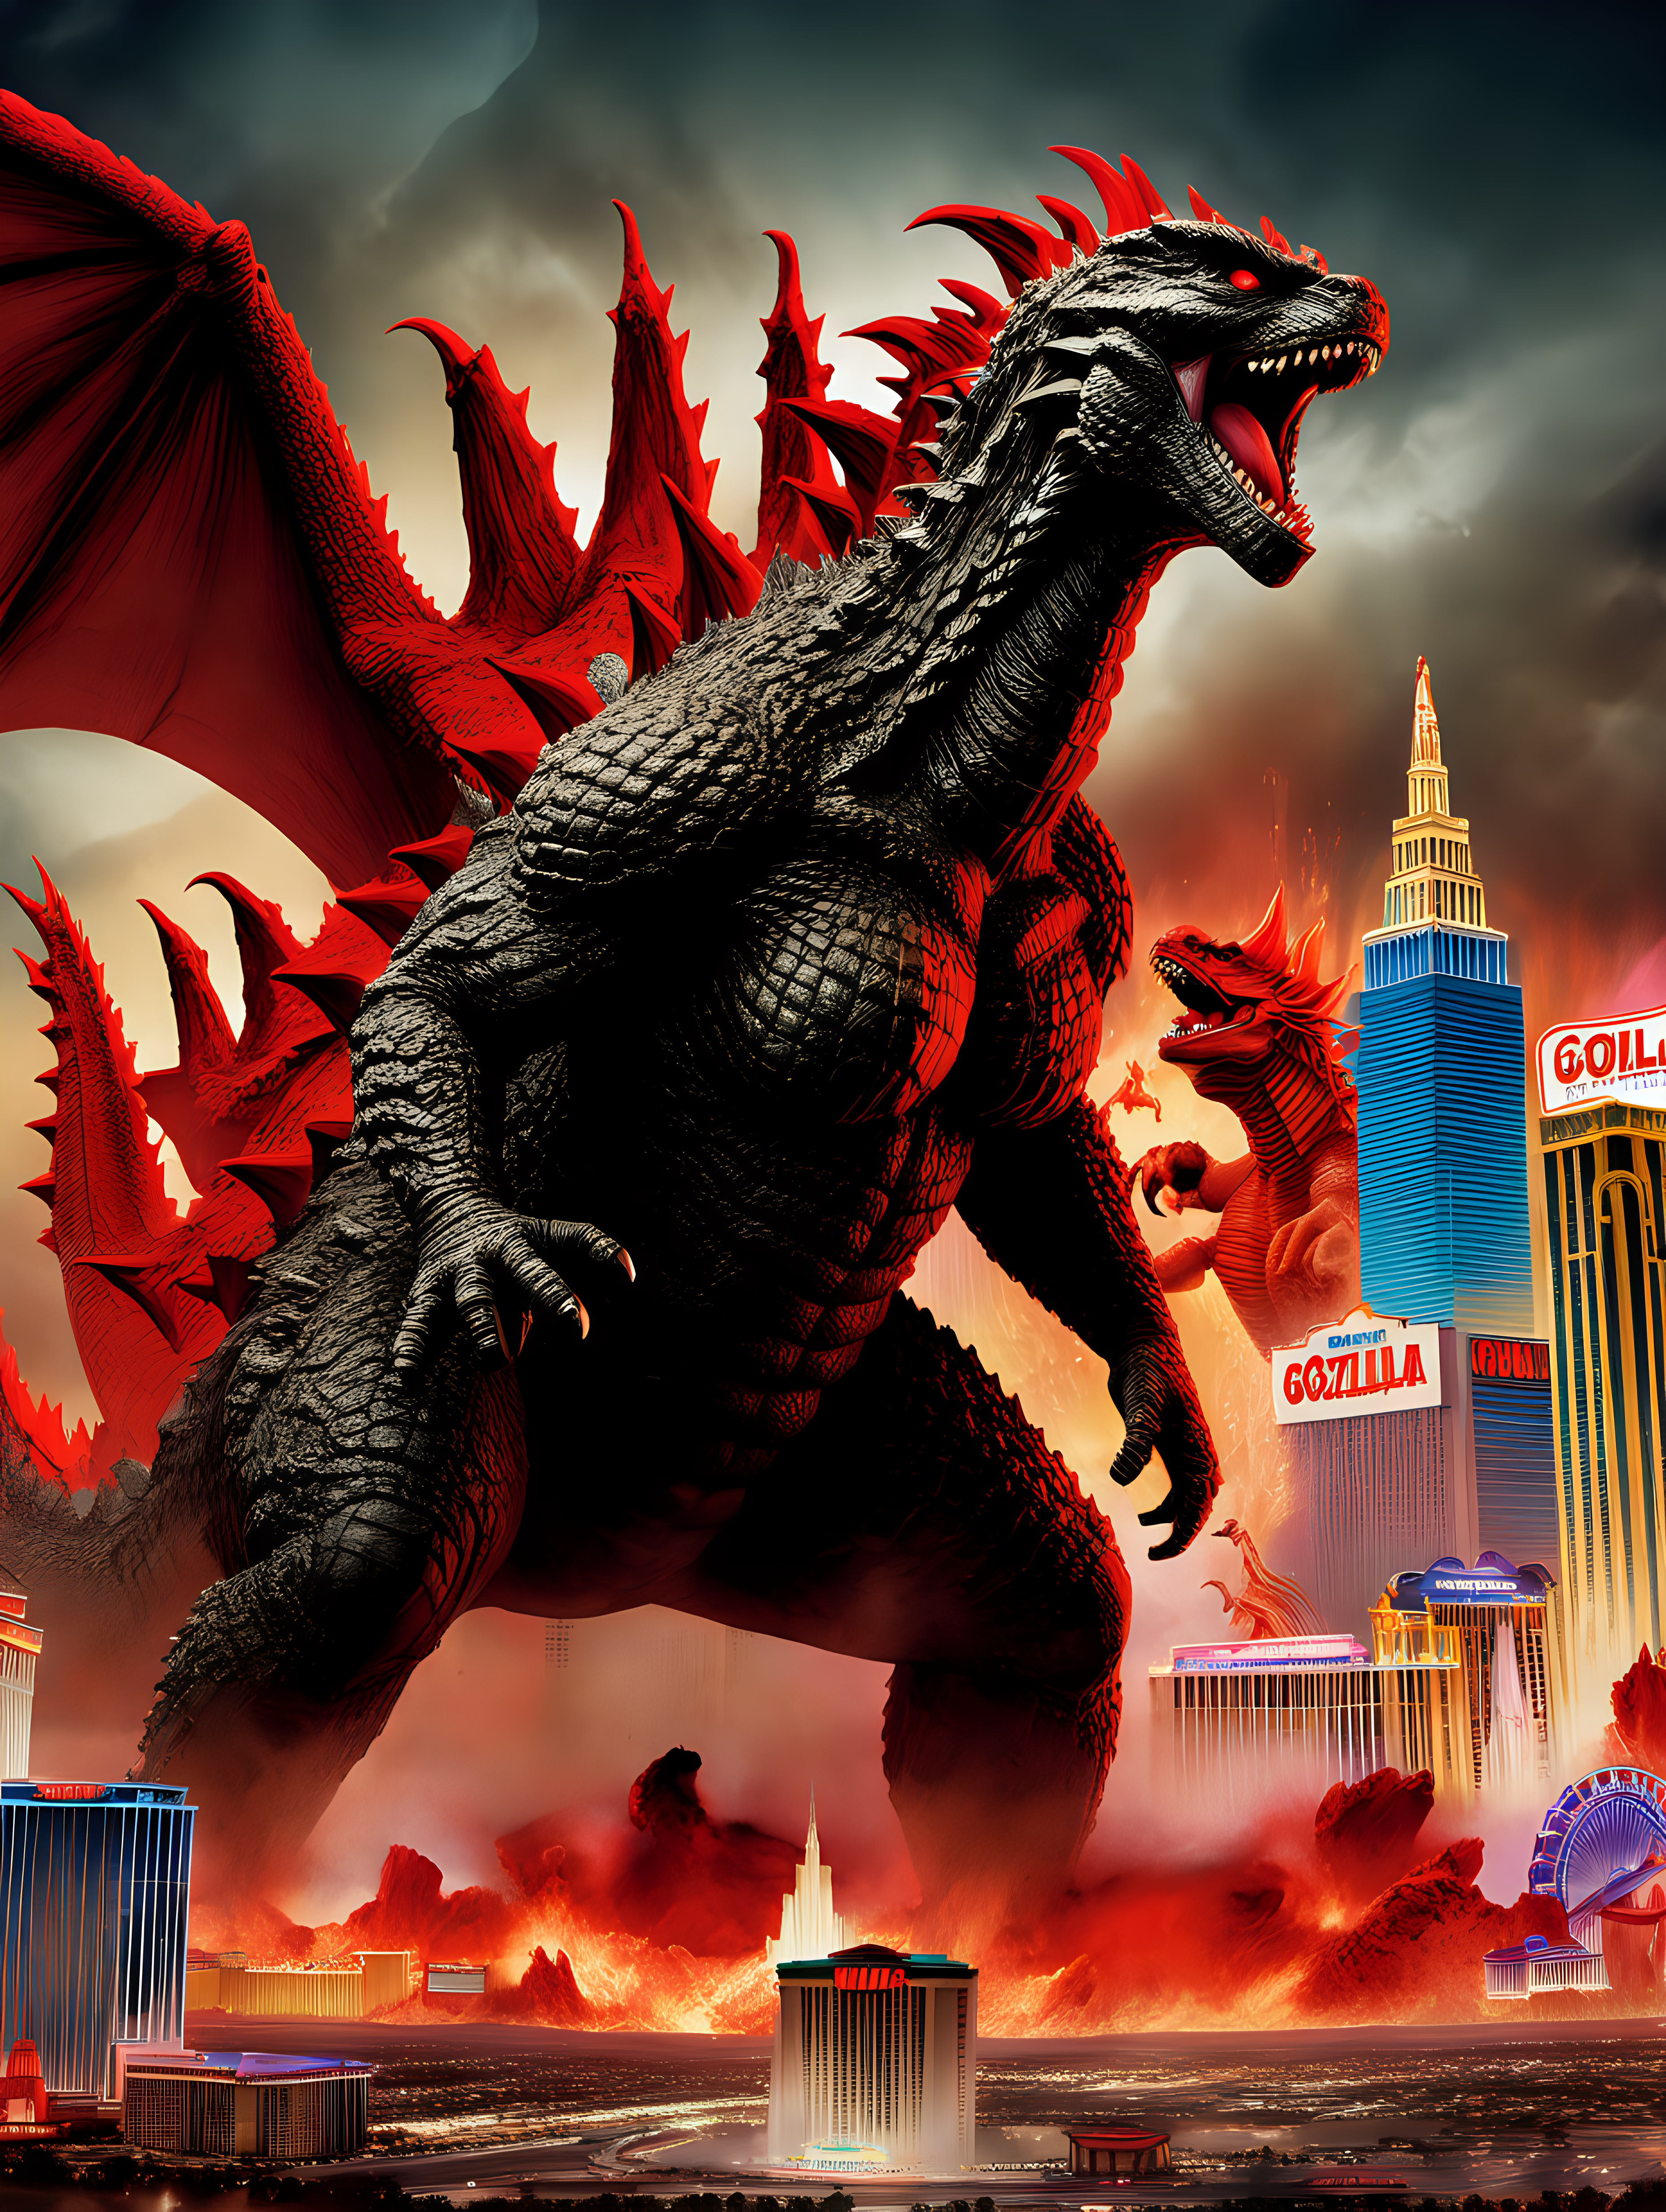 Movie poster of Godzilla a red dragon destroying